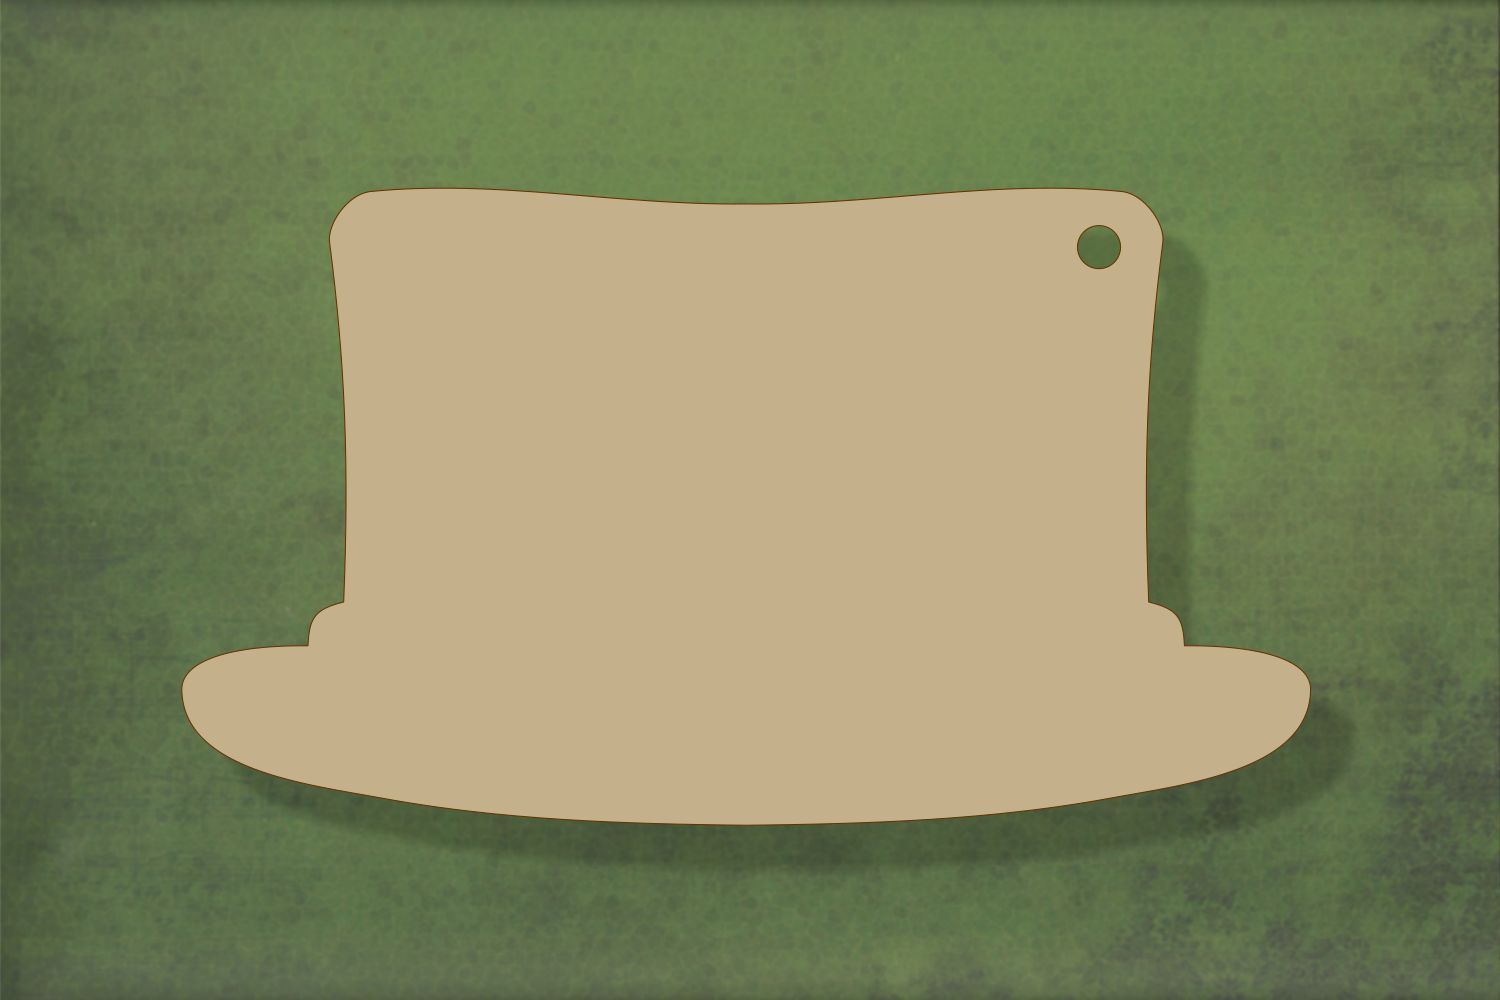 Laser cut, blank wooden Top hat shape for craft